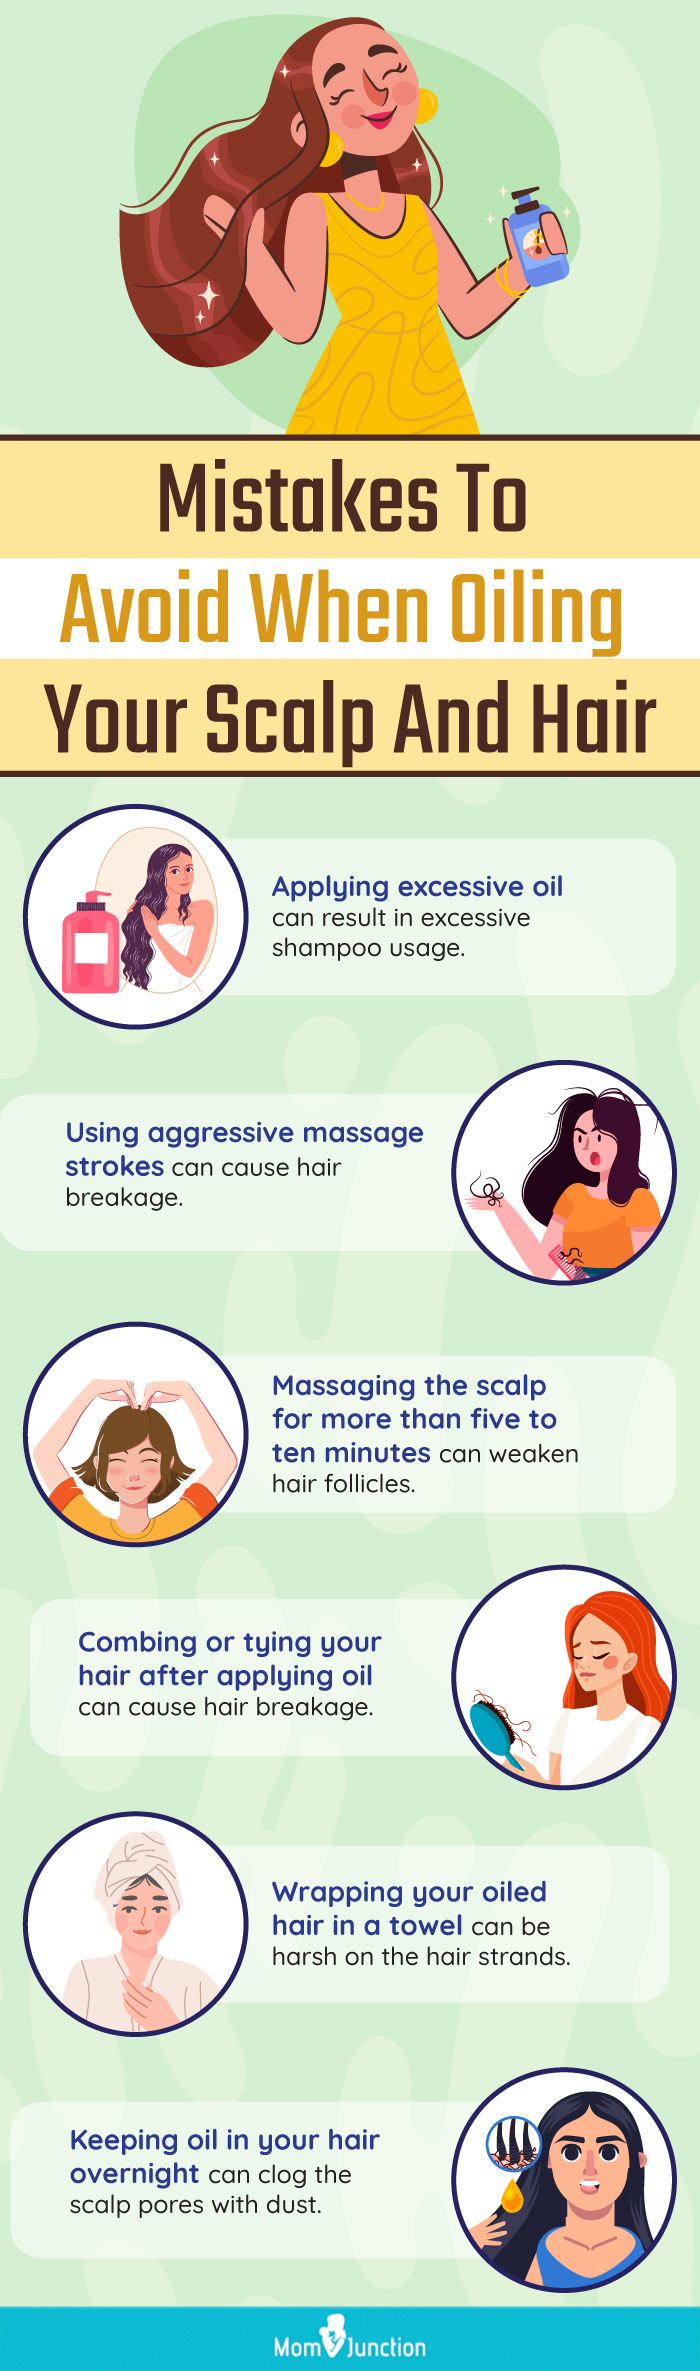 Mistakes To Avoid When Oiling Your Scalp And Hair (infographic)